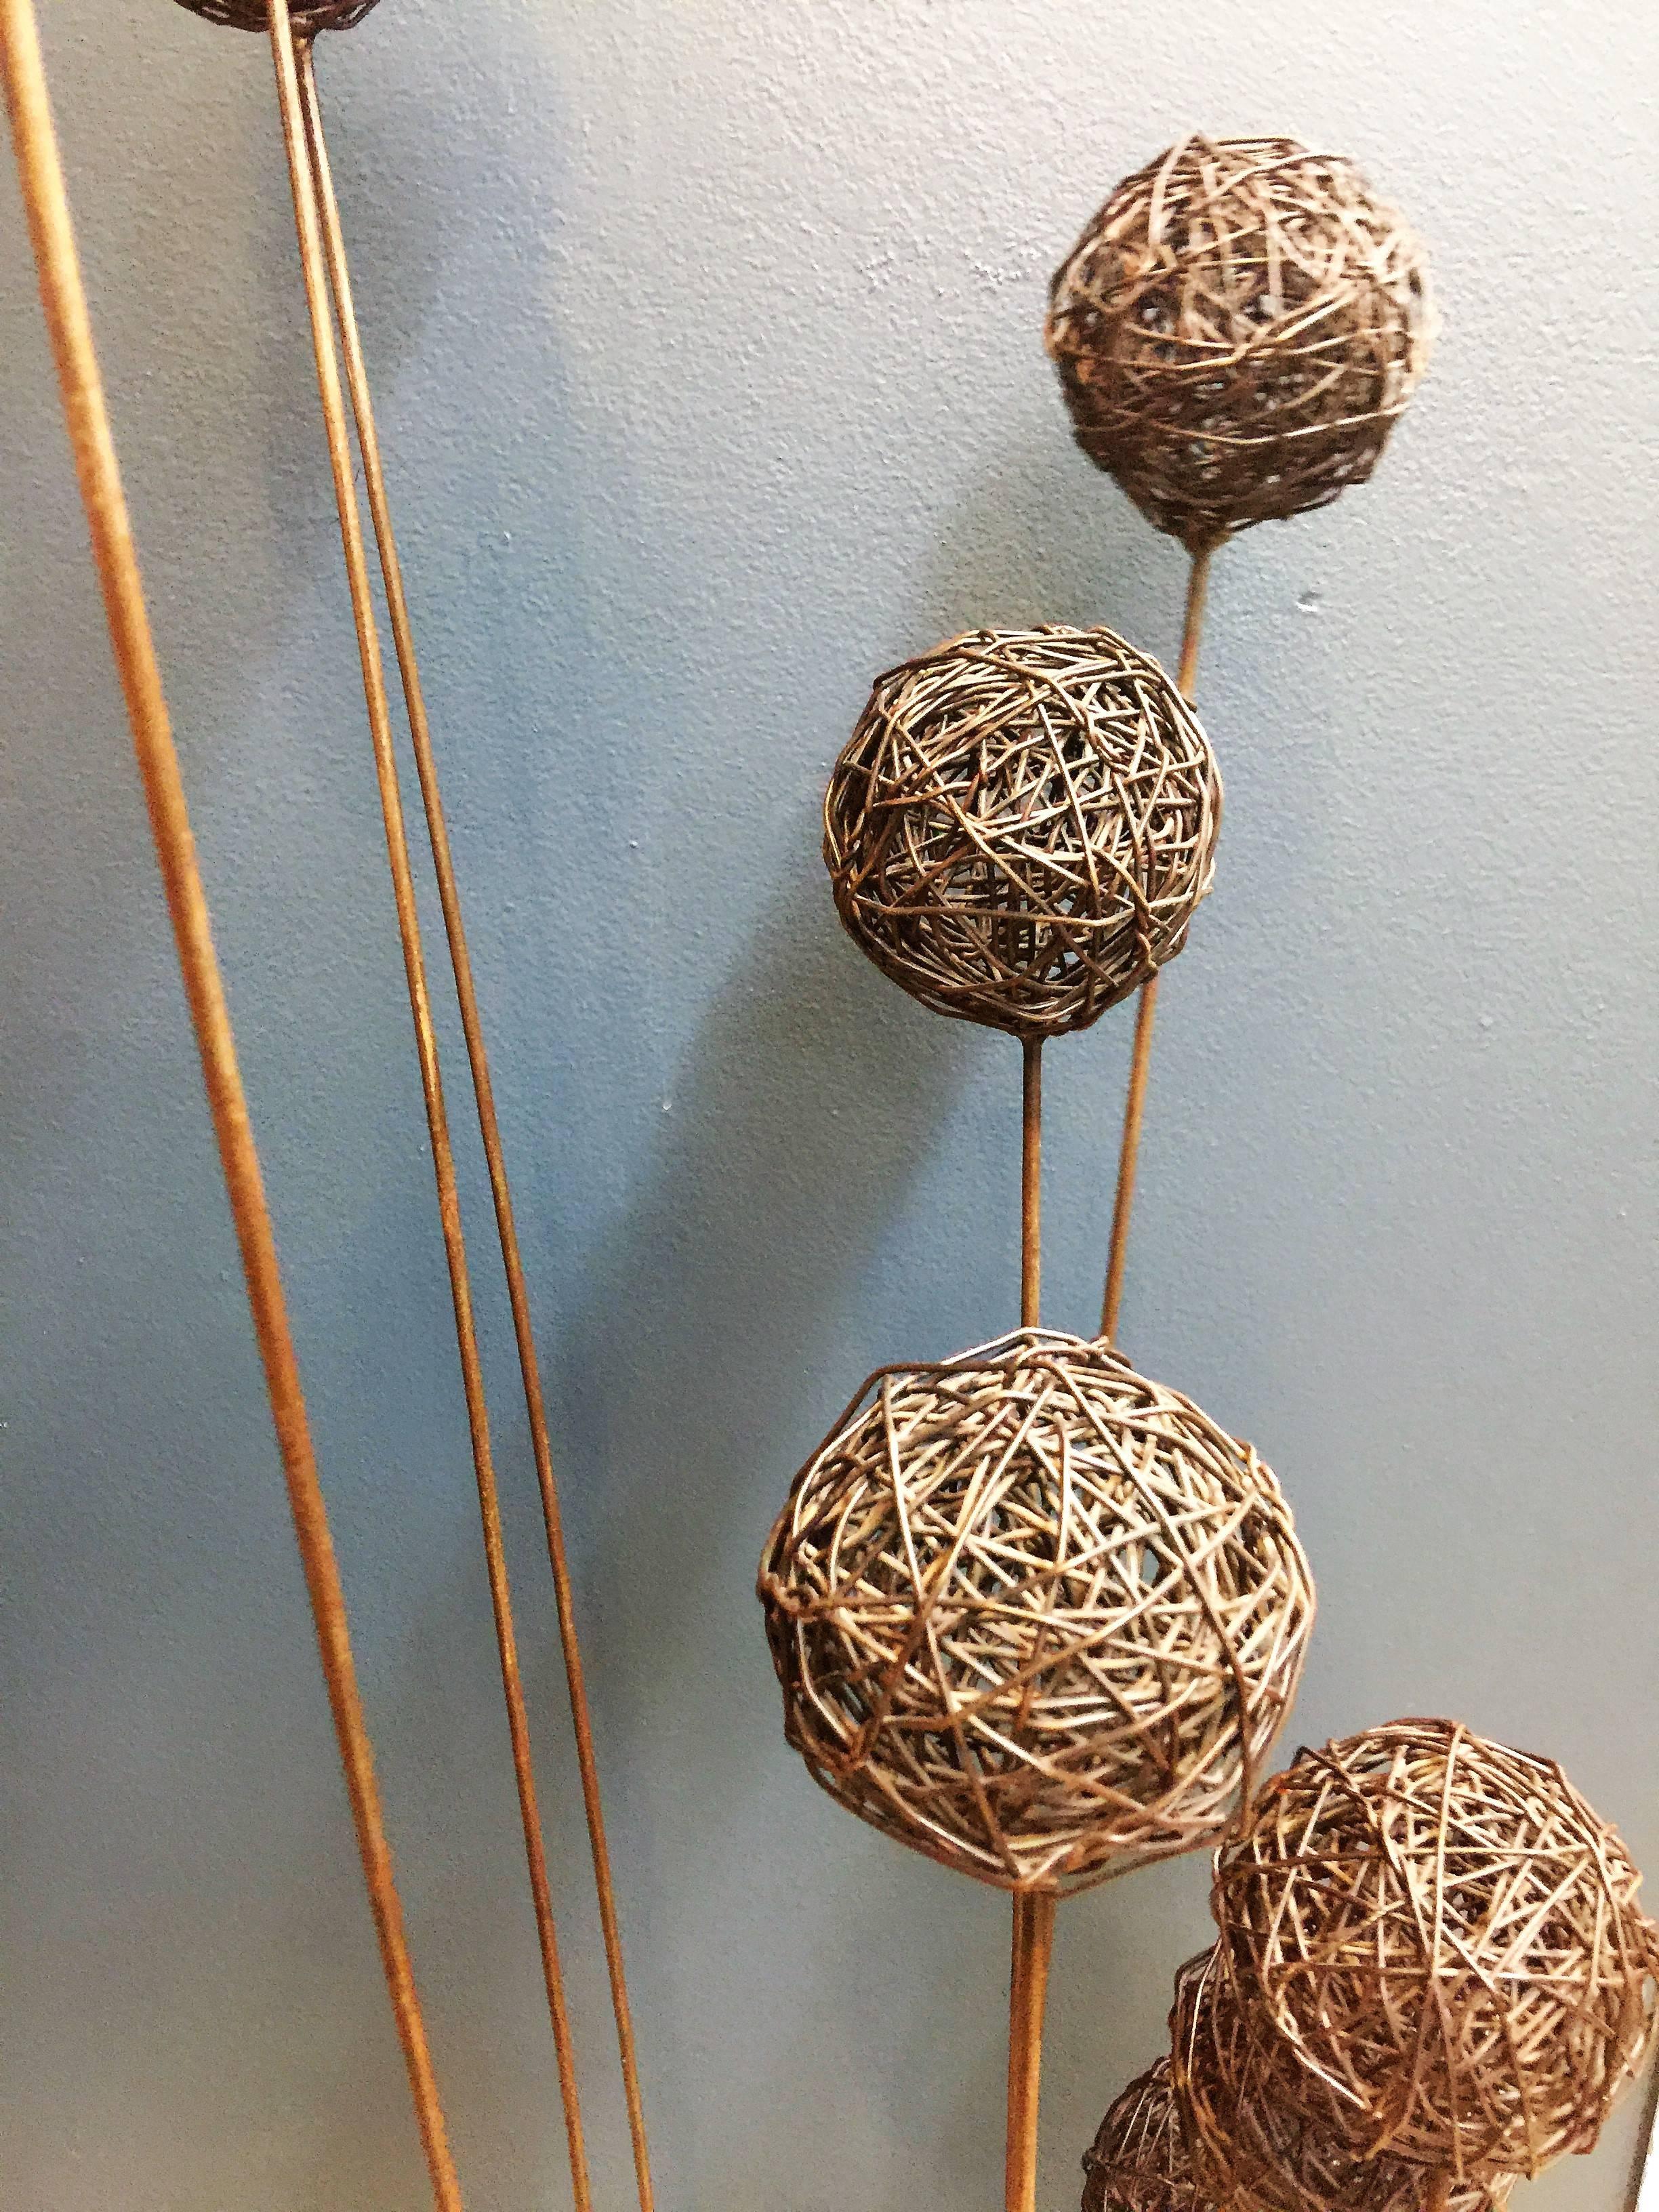 Interesting and modern metal nine wire ball form sculpture that has movement when touched, like the sonambient sculptures by sculptor Harry Bertoia.